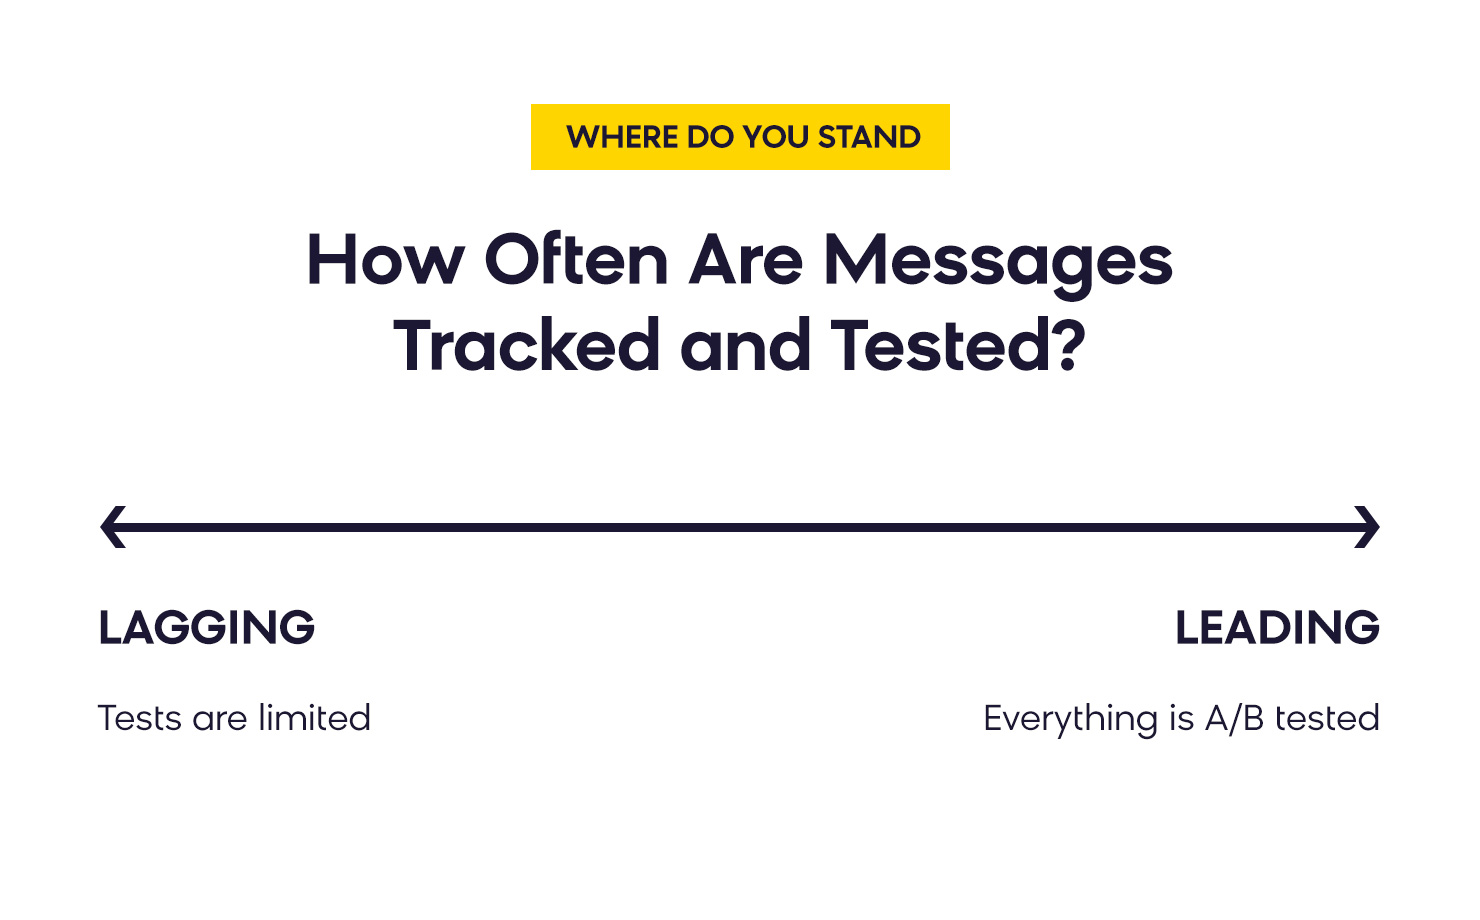 How often are messages tracked and tested?